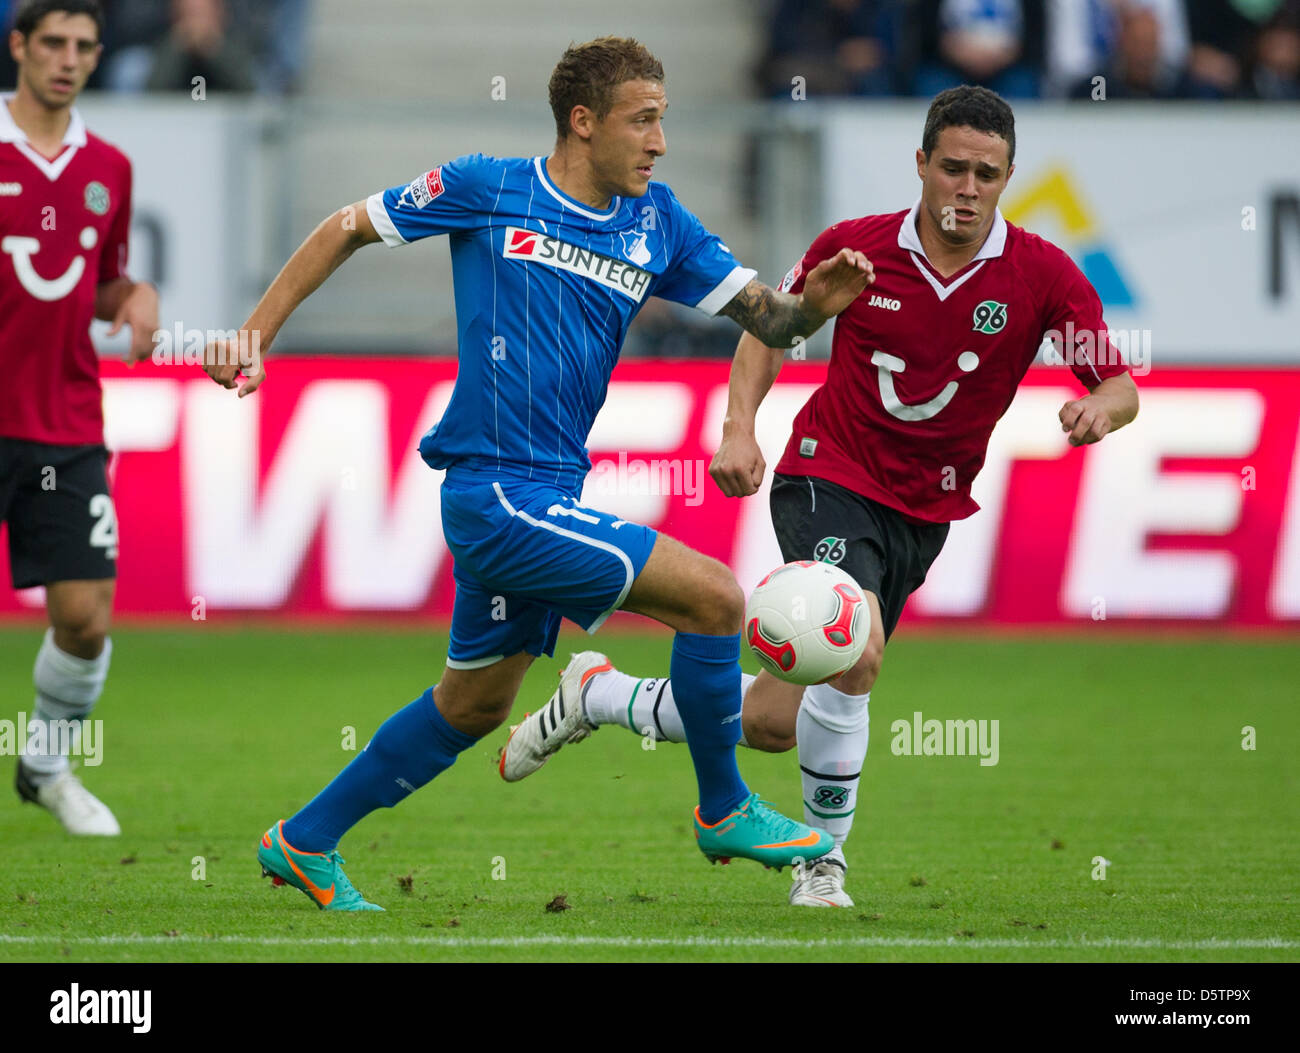 Hoffenheim's Fabian Johnson (L) and Hanover's Manuel Schmiedebach vie for the ball during the German Bundesliga soccer match 1899 Hoffenheim vs Hanover 96 at Rhein-Neckar-Arena in Sinsheim, Germany, 23 September 2012. The match ended 3:1. Photo: Uwe Anspach  (ATTENTION: EMBARGO CONDITIONS! The DFL permits the further  utilisation of up to 15 pictures only (no sequntial pictures or  Stock Photo